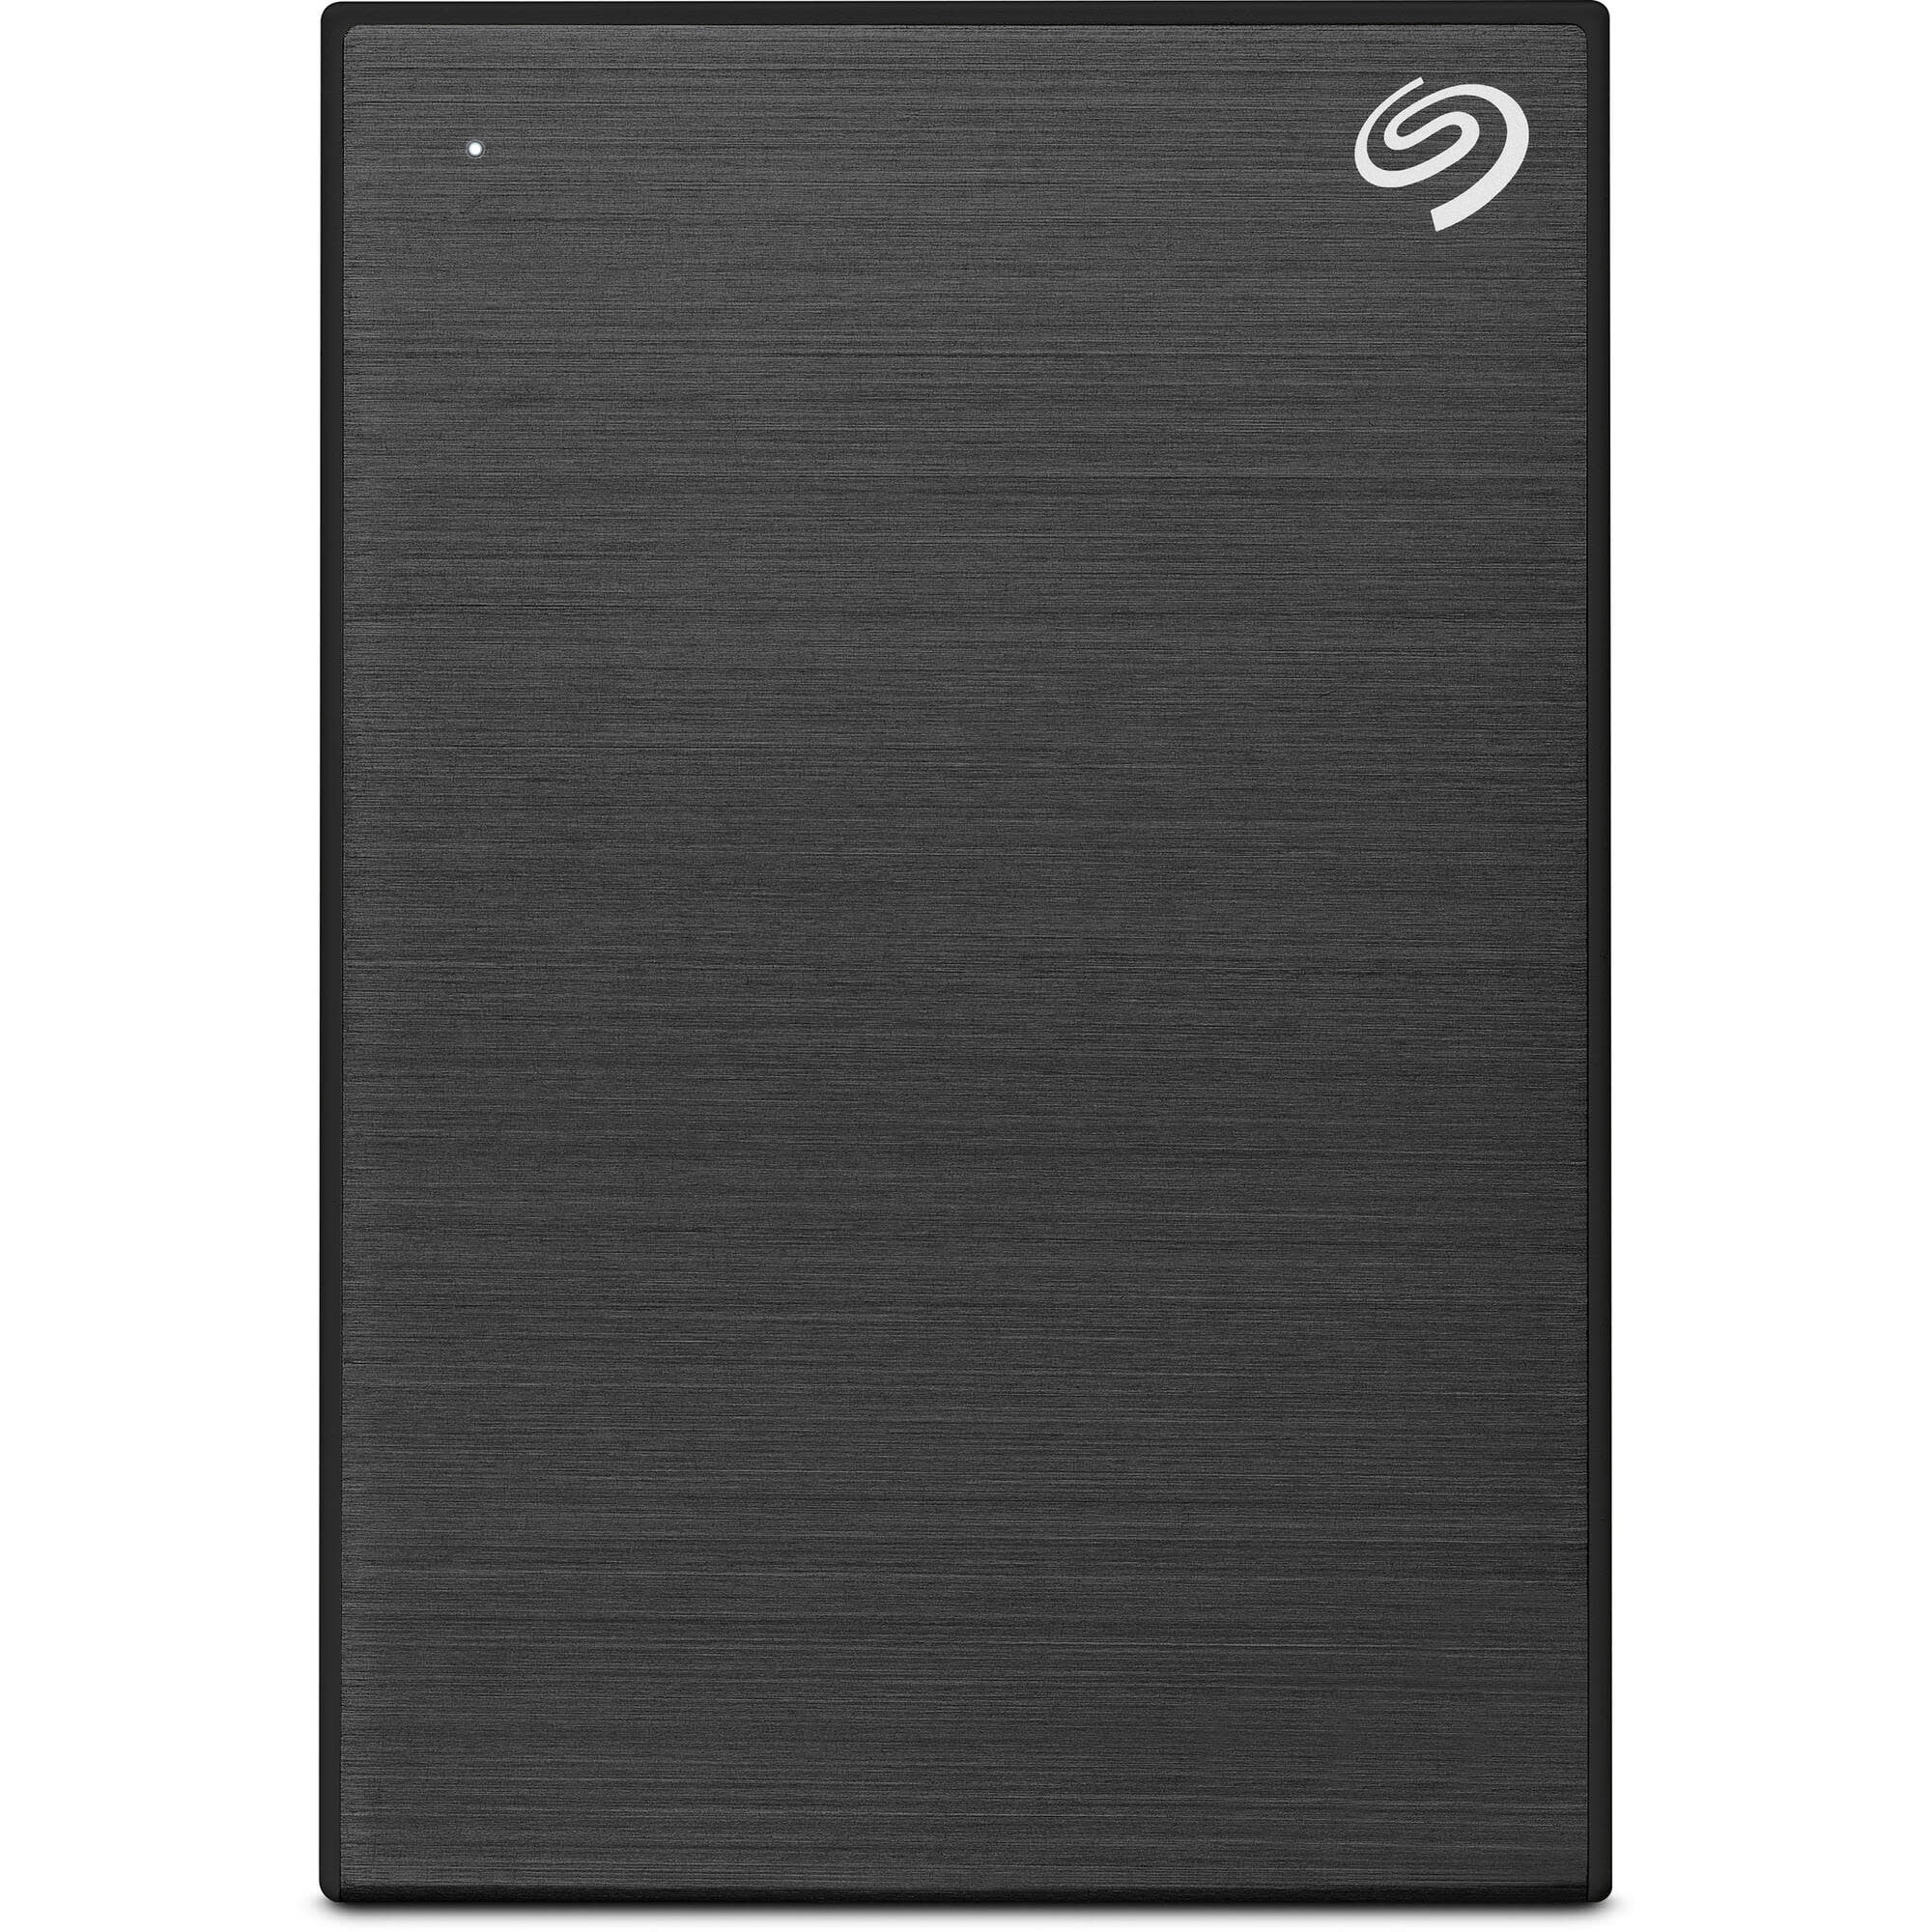 Seagate One Touch 5TB External Hard Drive Black USB 3.0